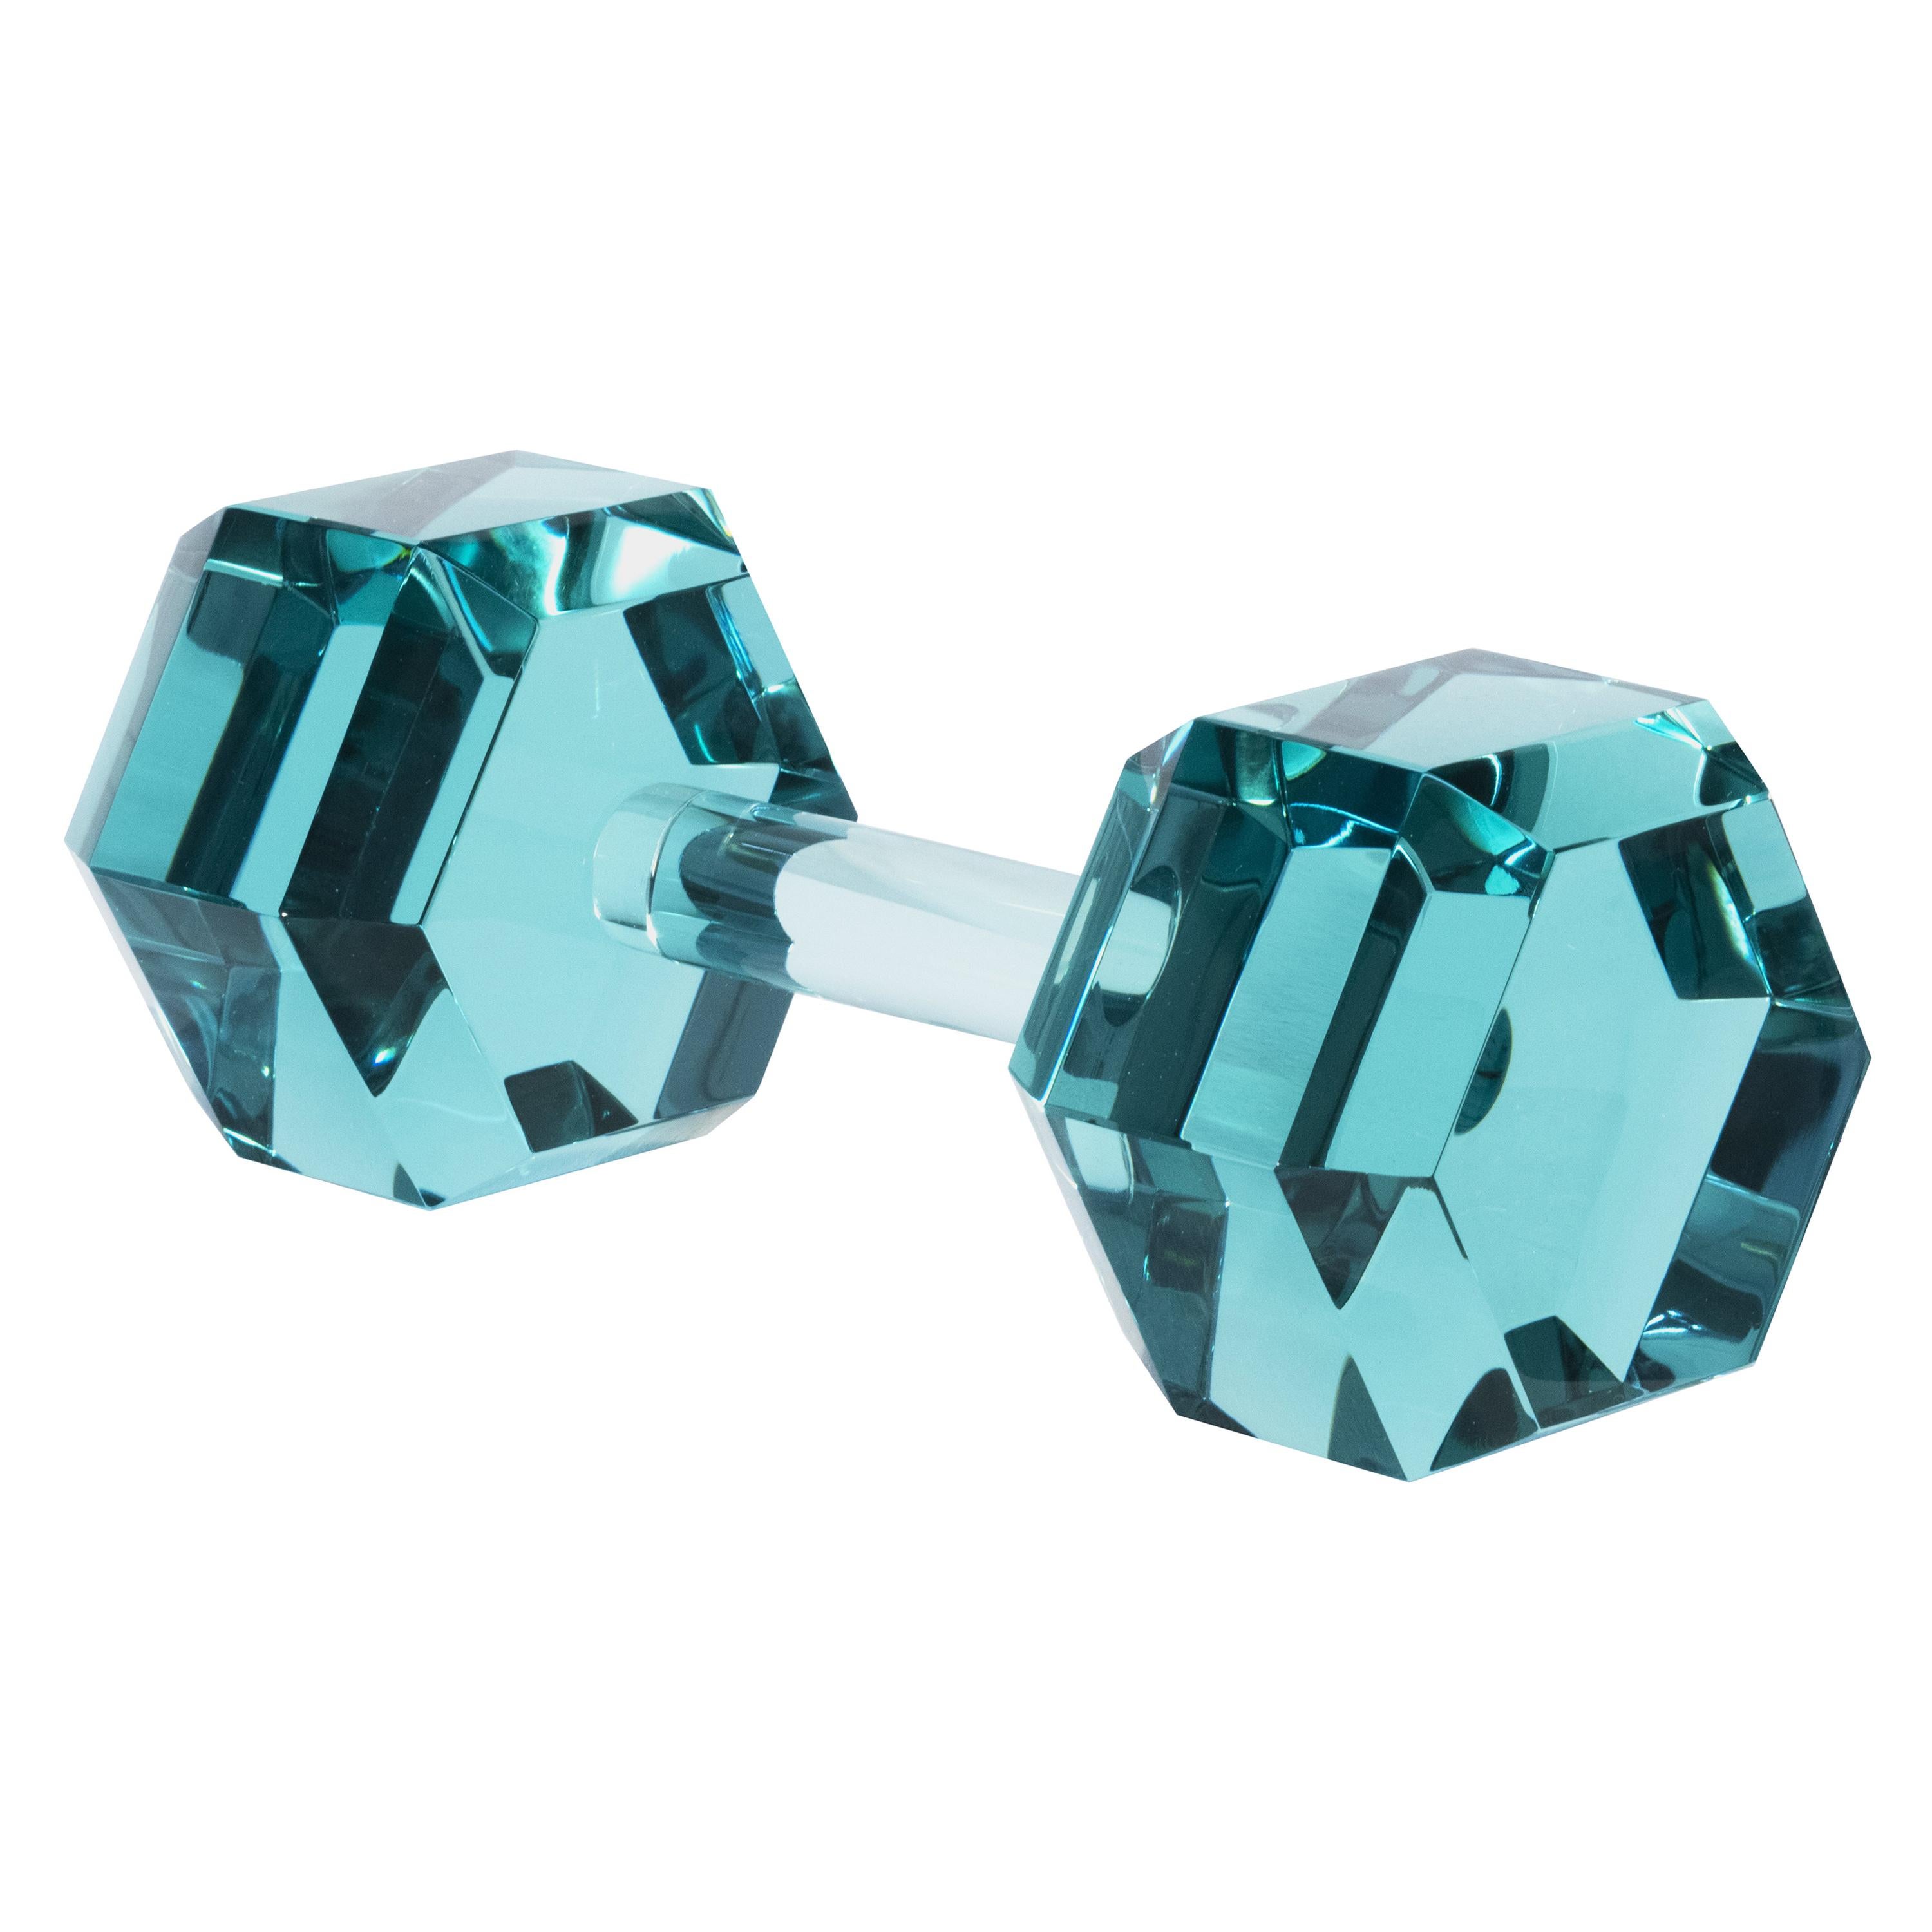 Contemporary by Ghirò Studio 'Dumbbell' Aquamarine Crystal Handmade in Italy